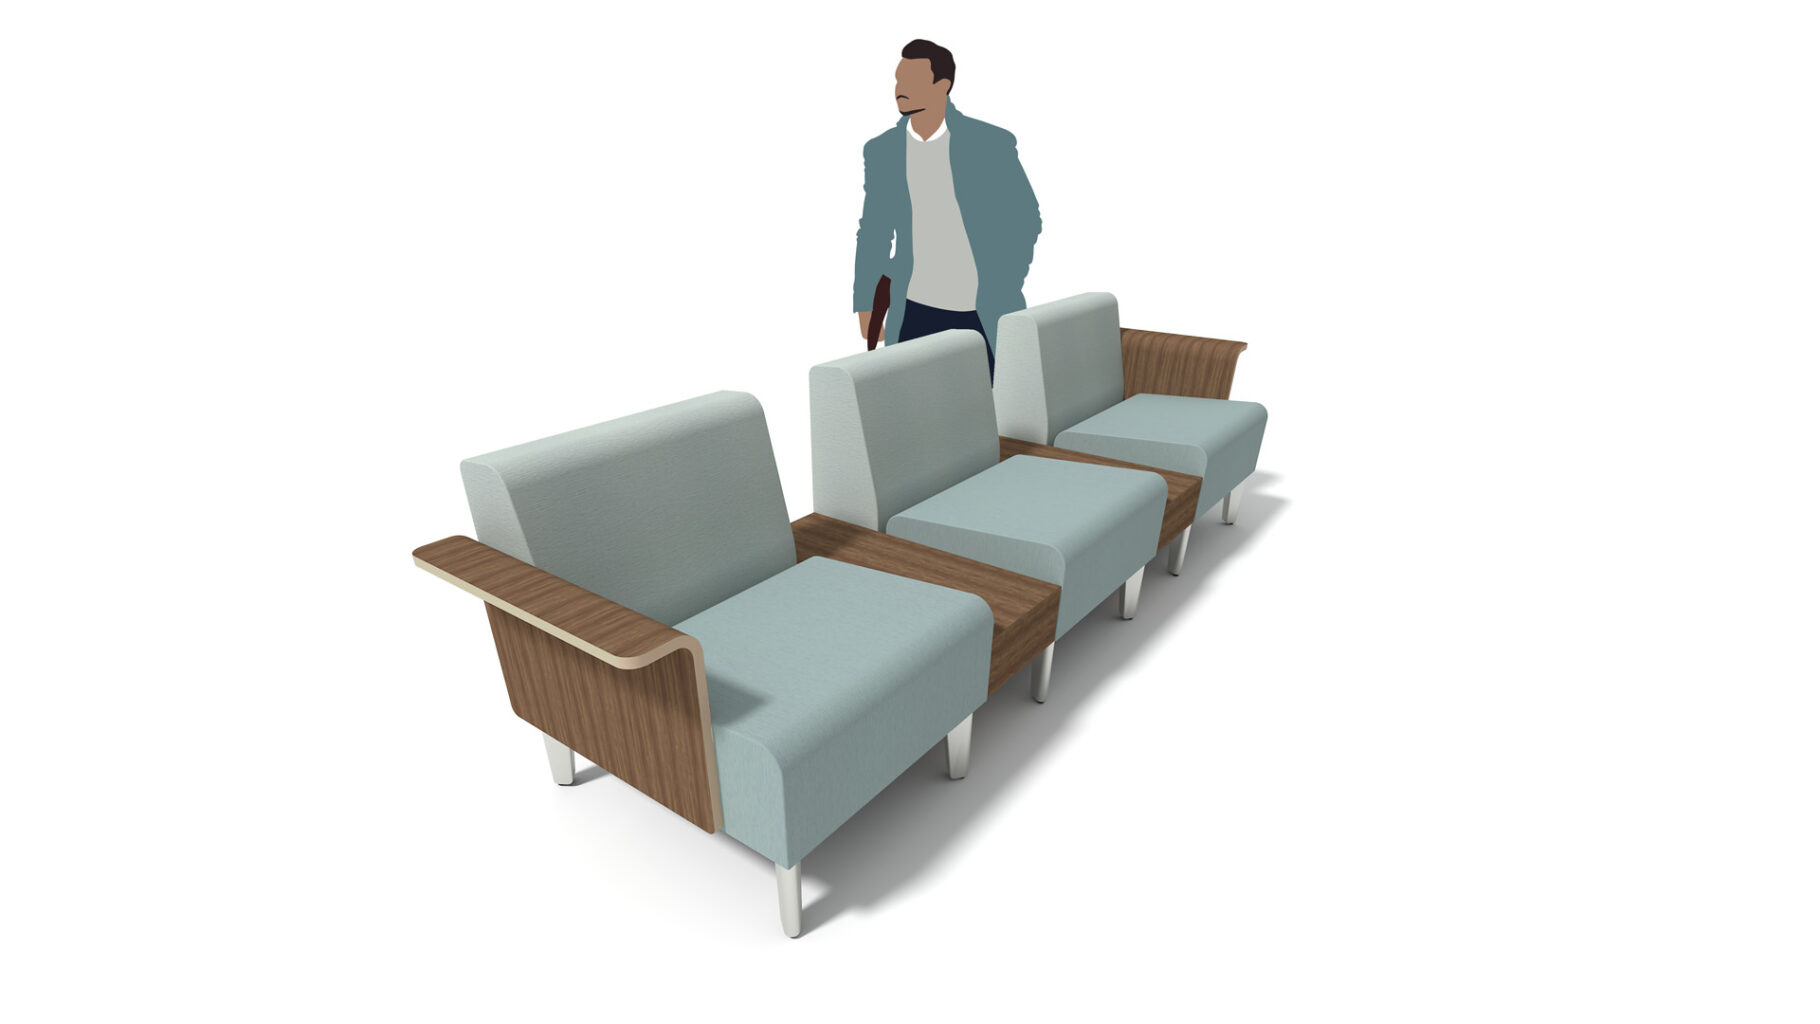 Concept B - connected seating configuration featuring  an Avila lounge chair with left arm facing molded wood arm, single depth table, lounge chair, single depth table, and avila lounge chair with right arm facing molded wood arm.